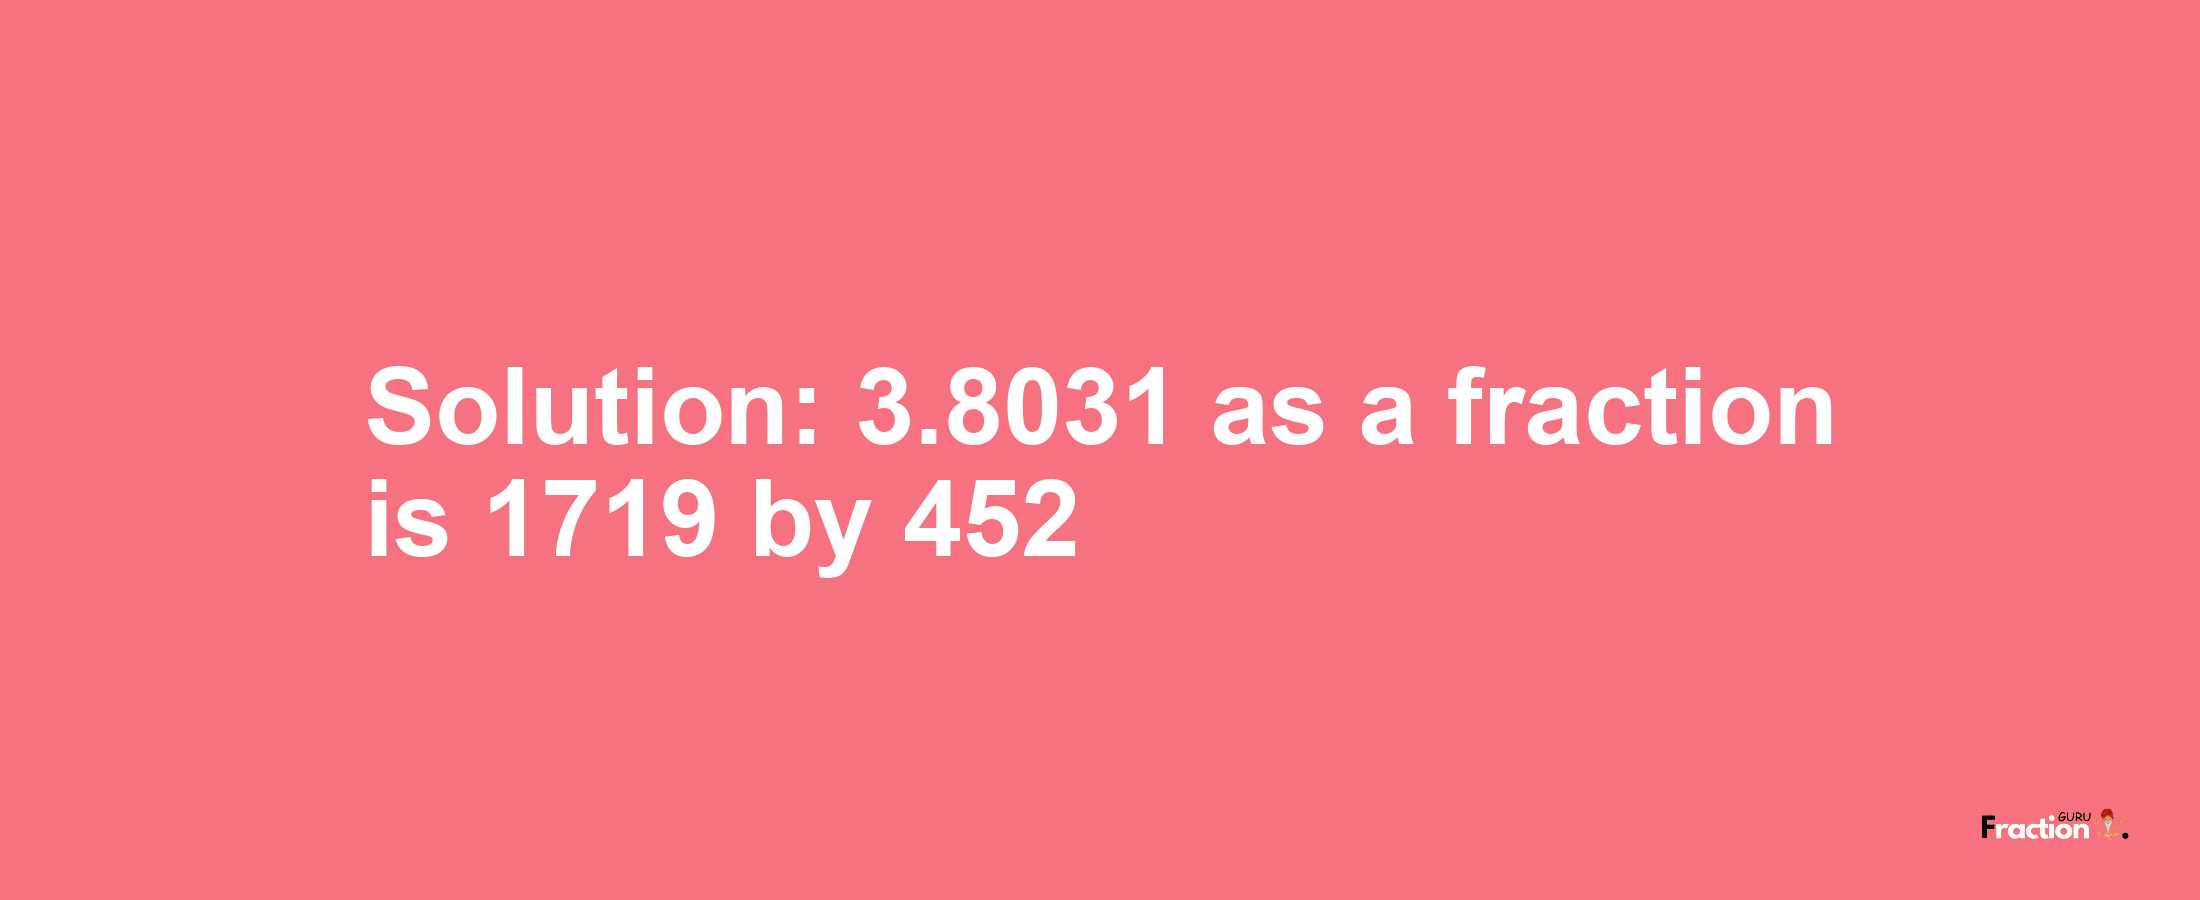 Solution:3.8031 as a fraction is 1719/452